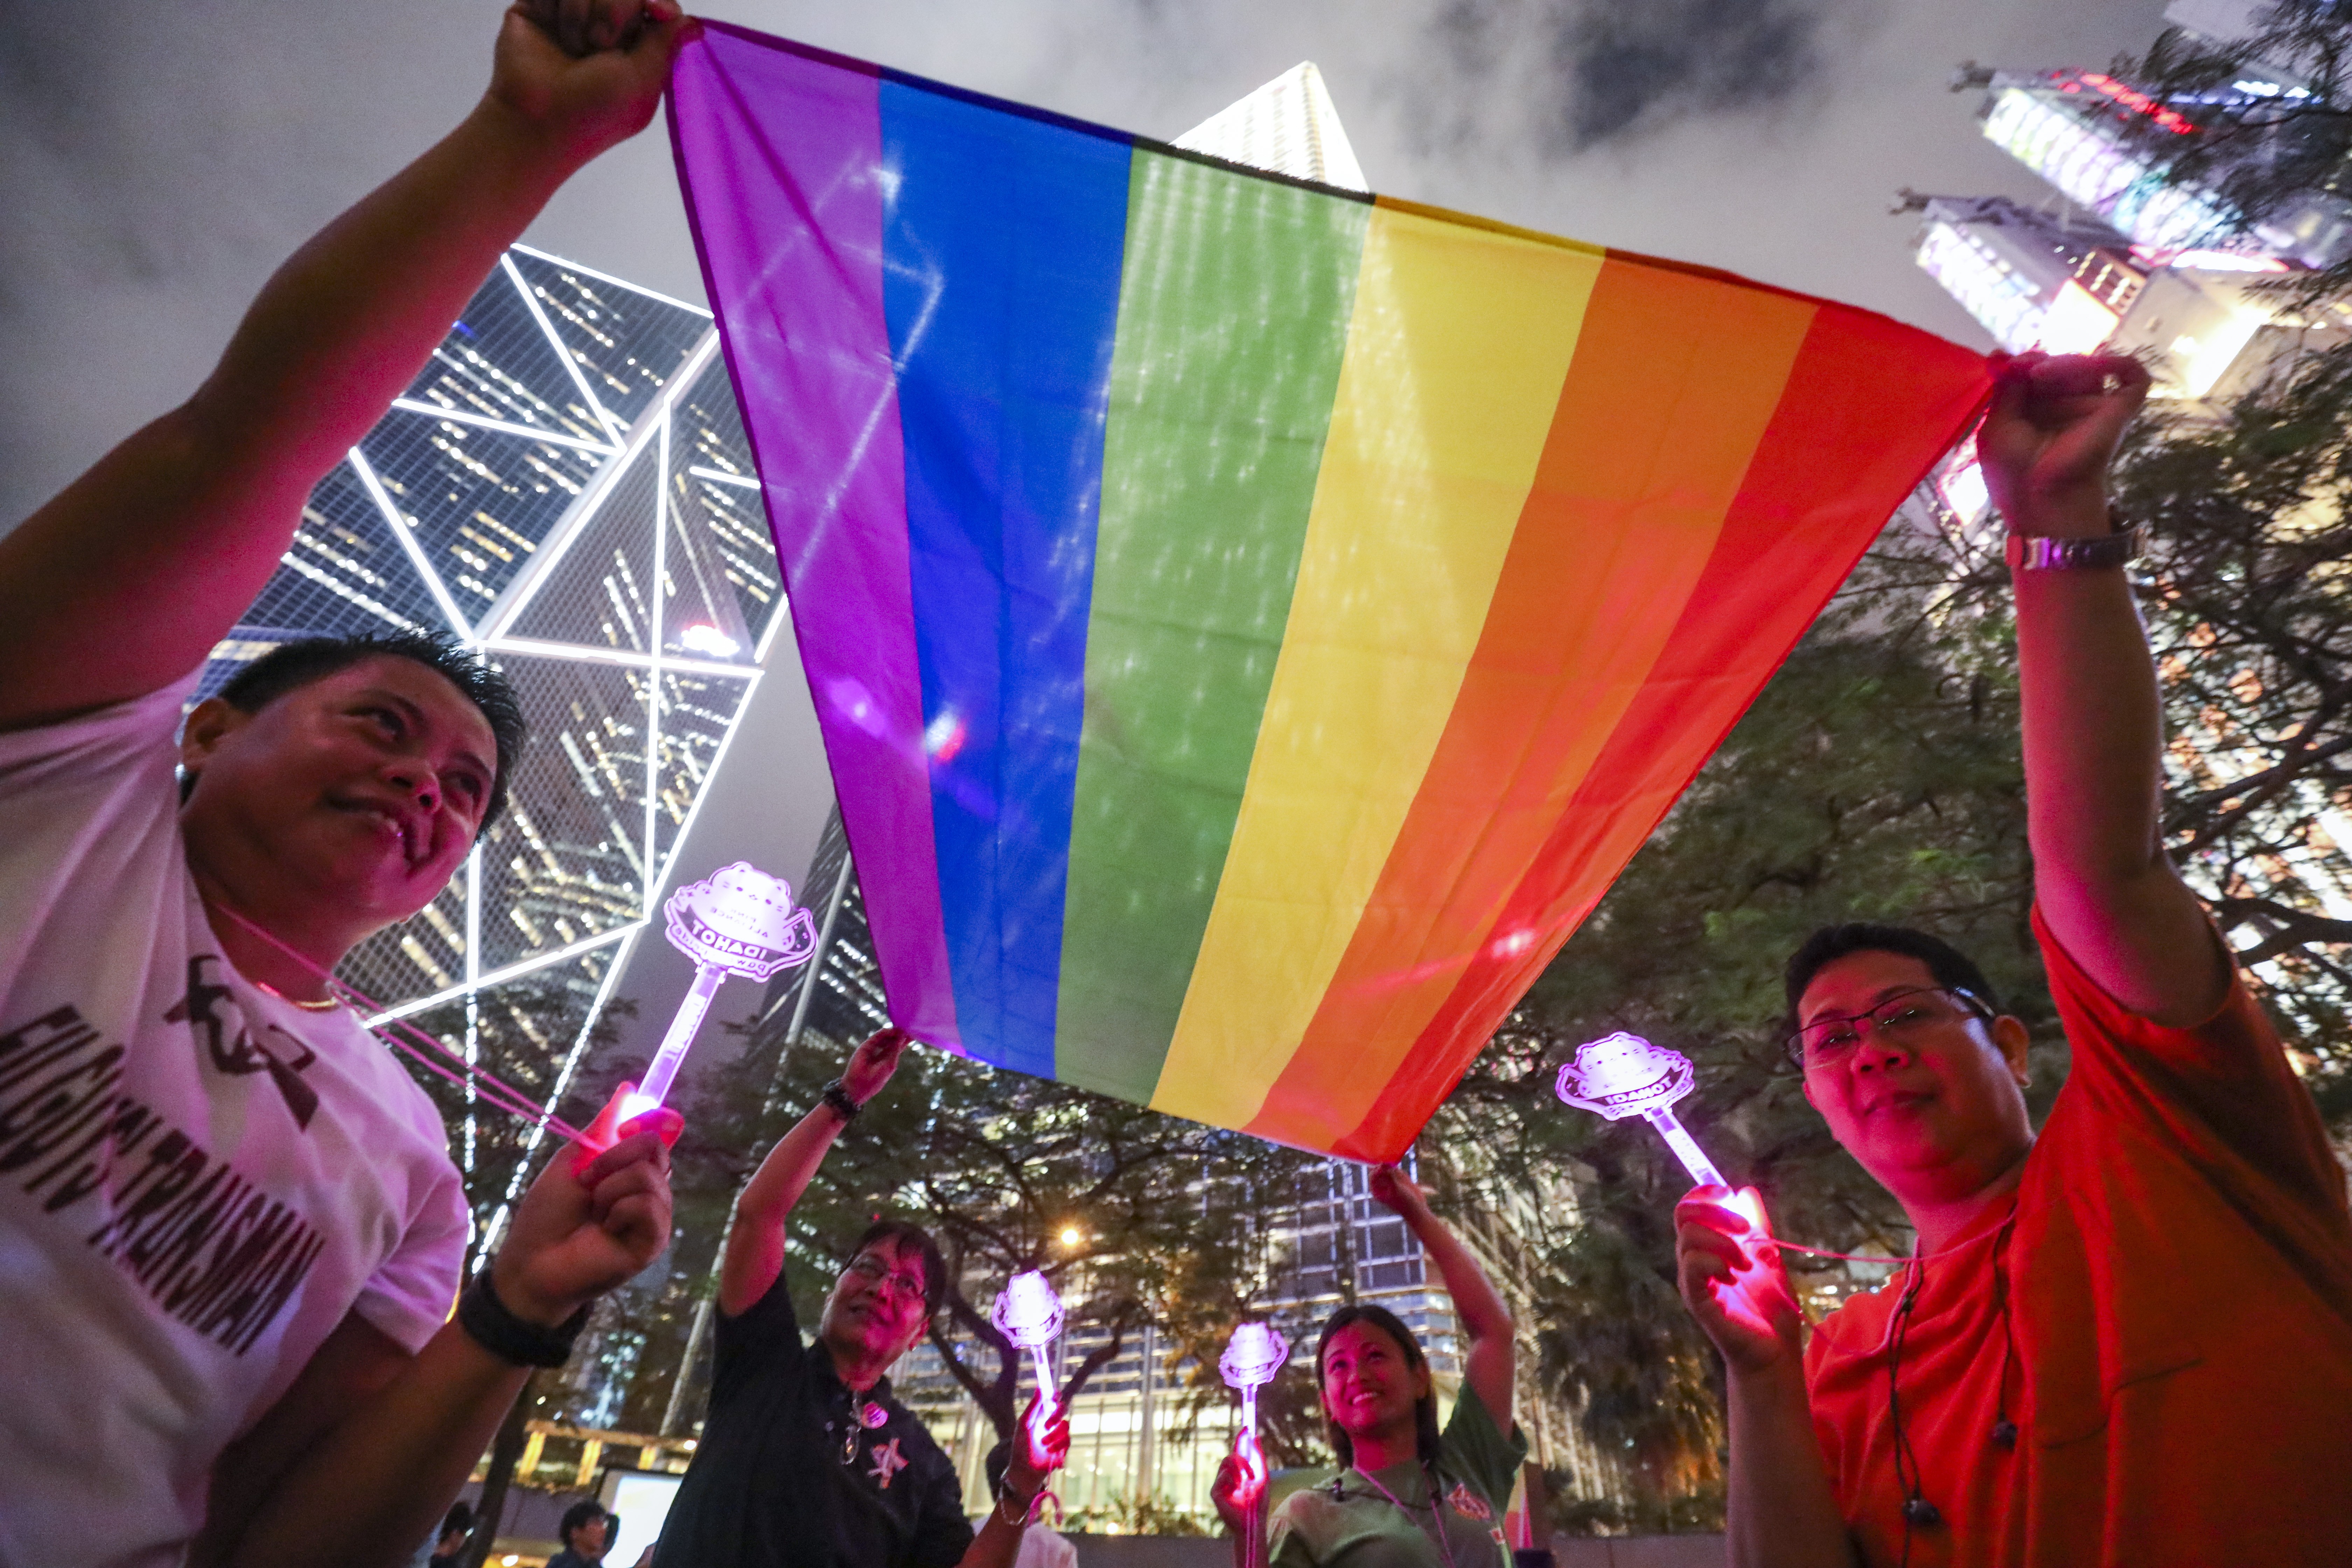 LGBT supporters in Hong Kong celebrate Taiwan’s vote to legalise same-sex marriage. Photo: Dickson Lee